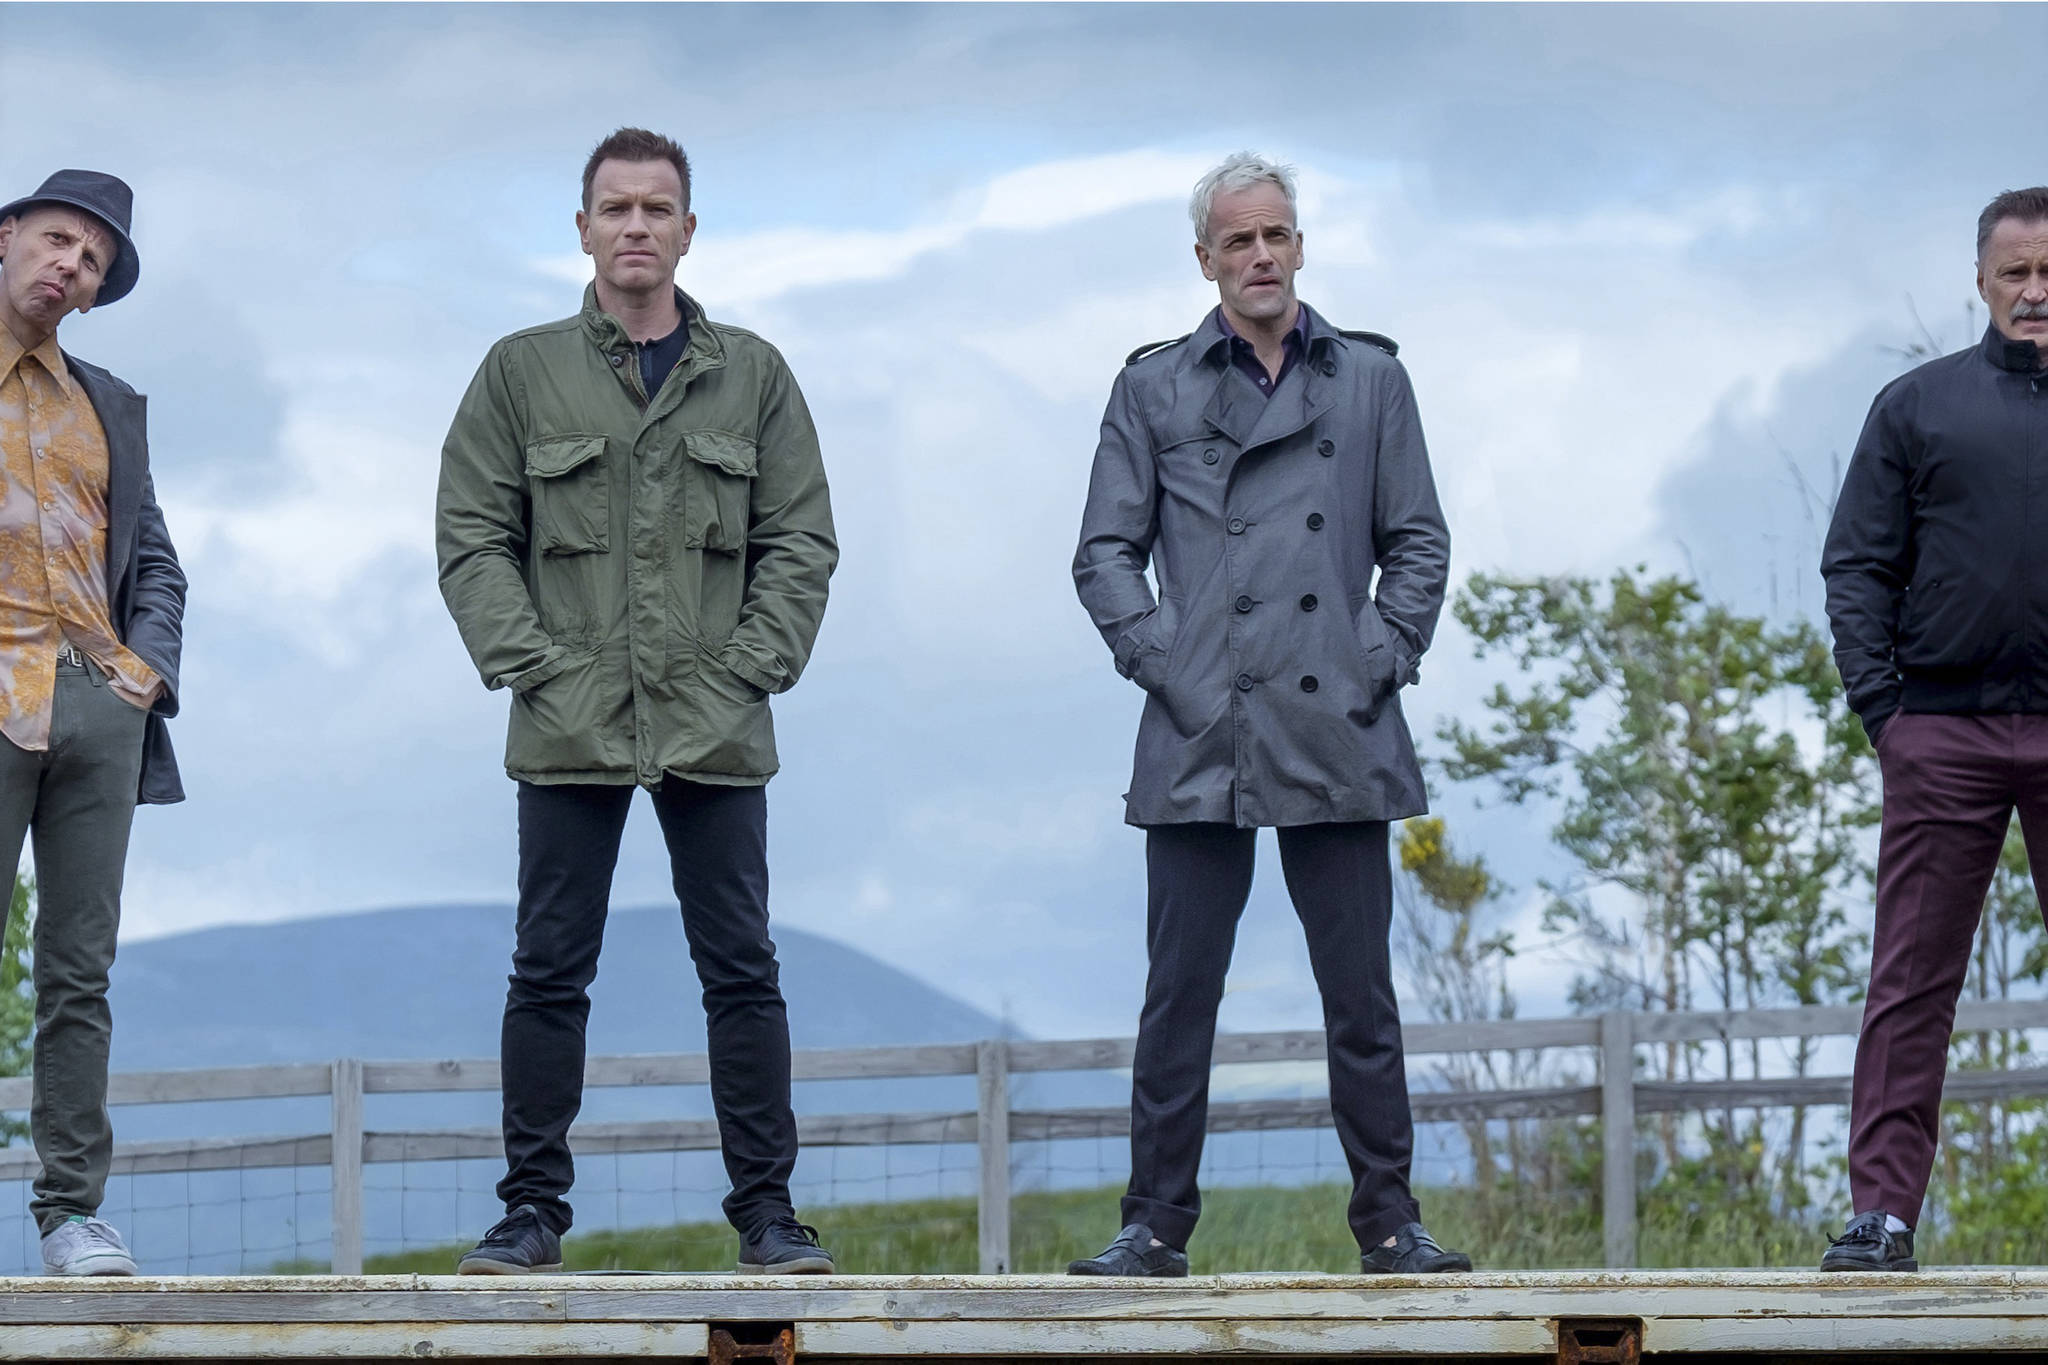 “T2 Trainspotting” Exchanges the Original’s Edge for Sentimentality